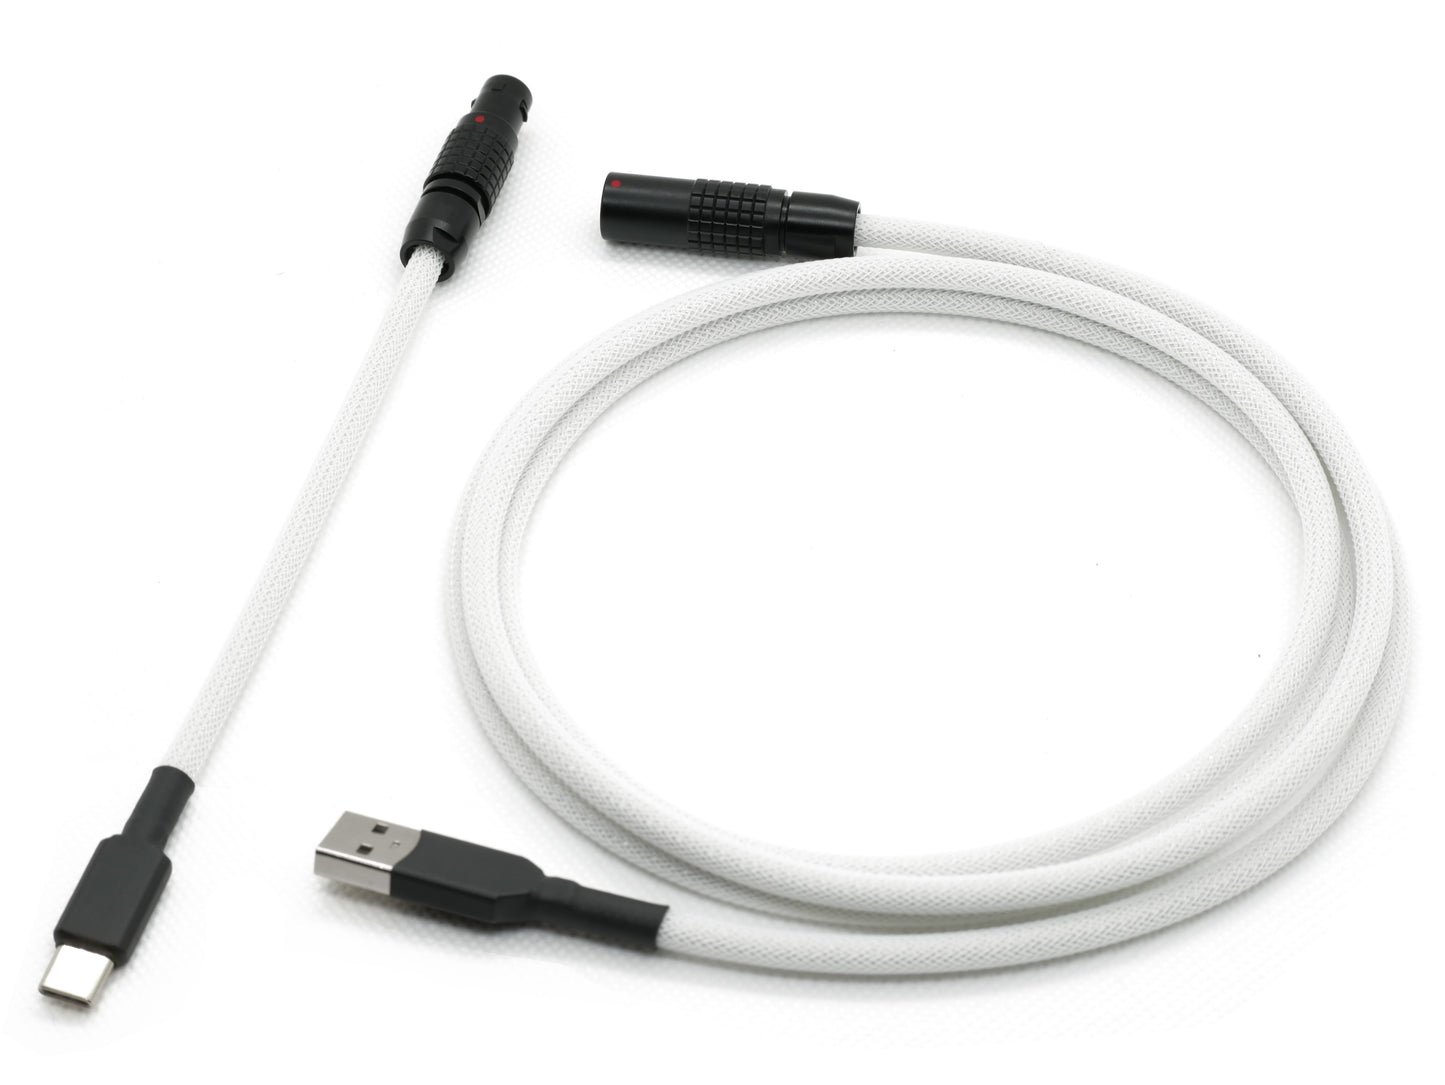 White and Black Lemo Style Cable